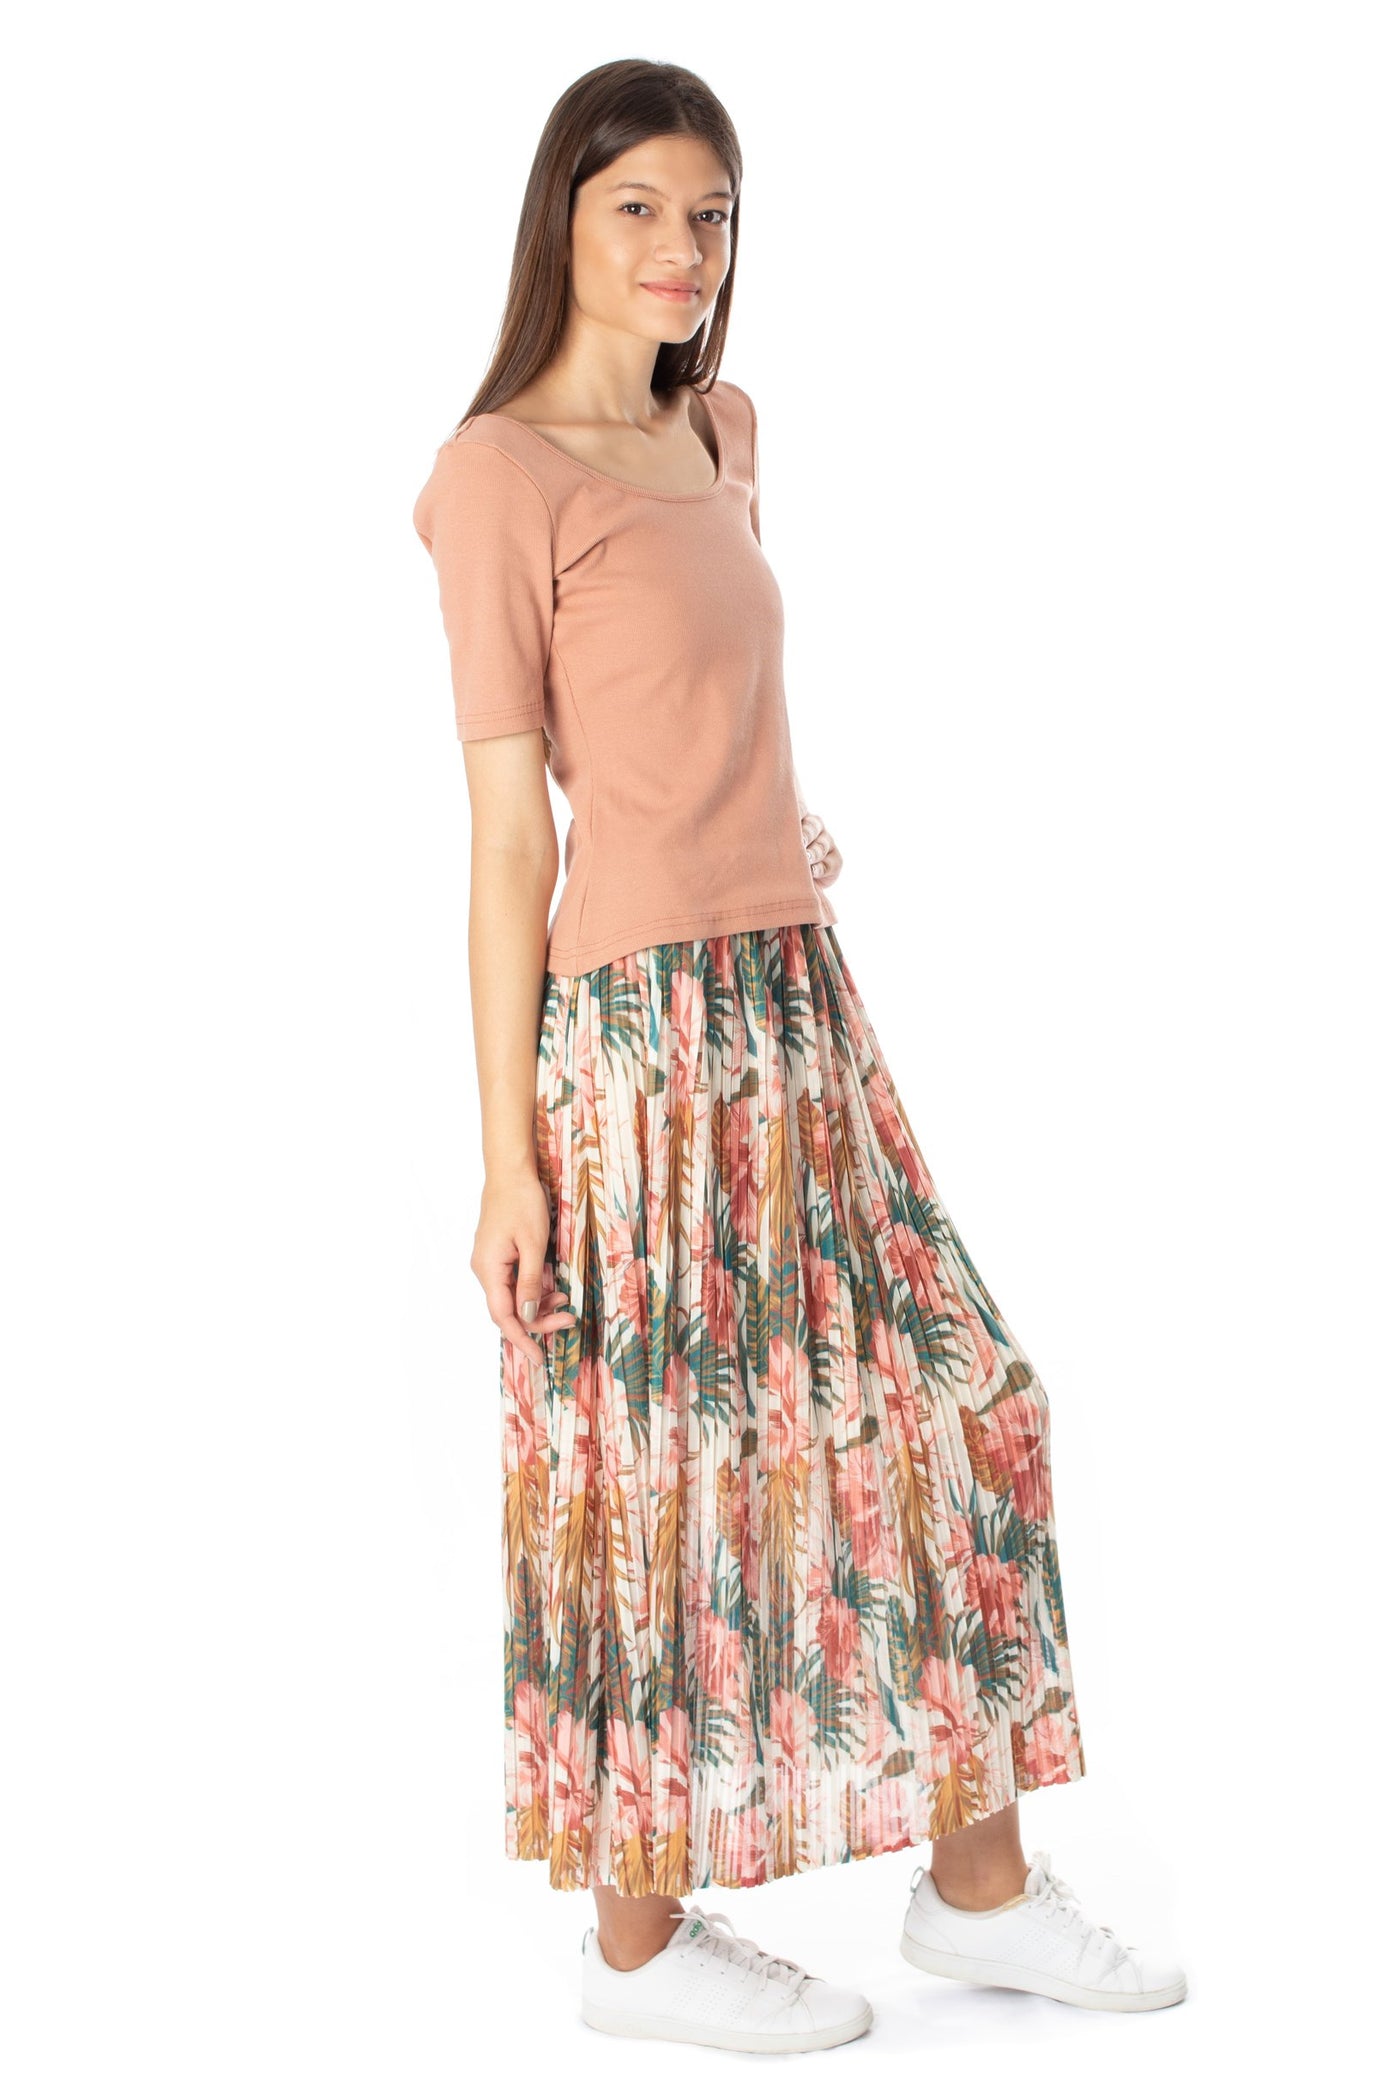 chassca floral printed maxi pleated skirt - Breakmood